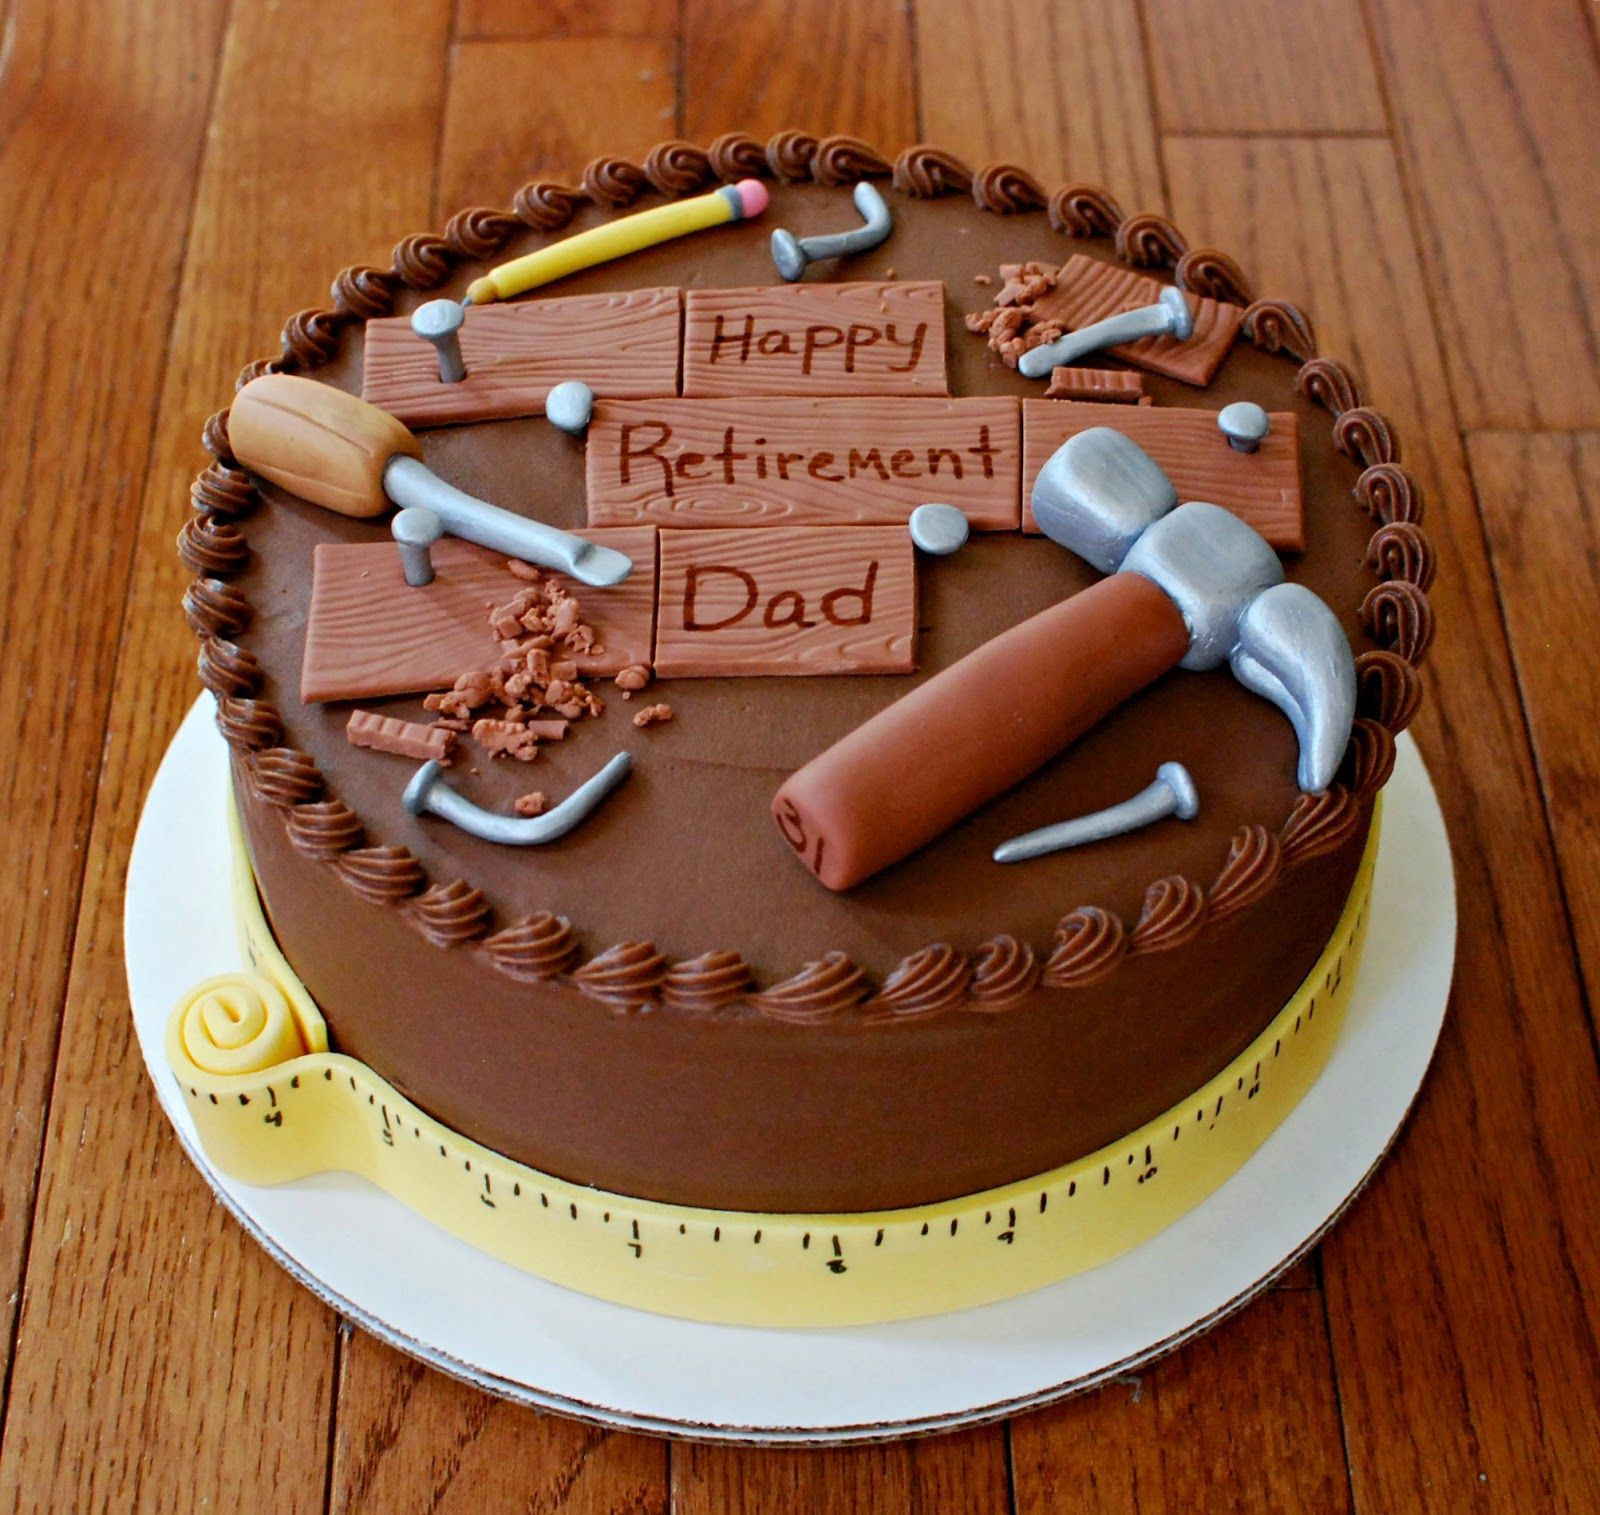 Retirement Party Ideas For Dad
 The Best Ideas for Retirement Party Ideas for Dad Home